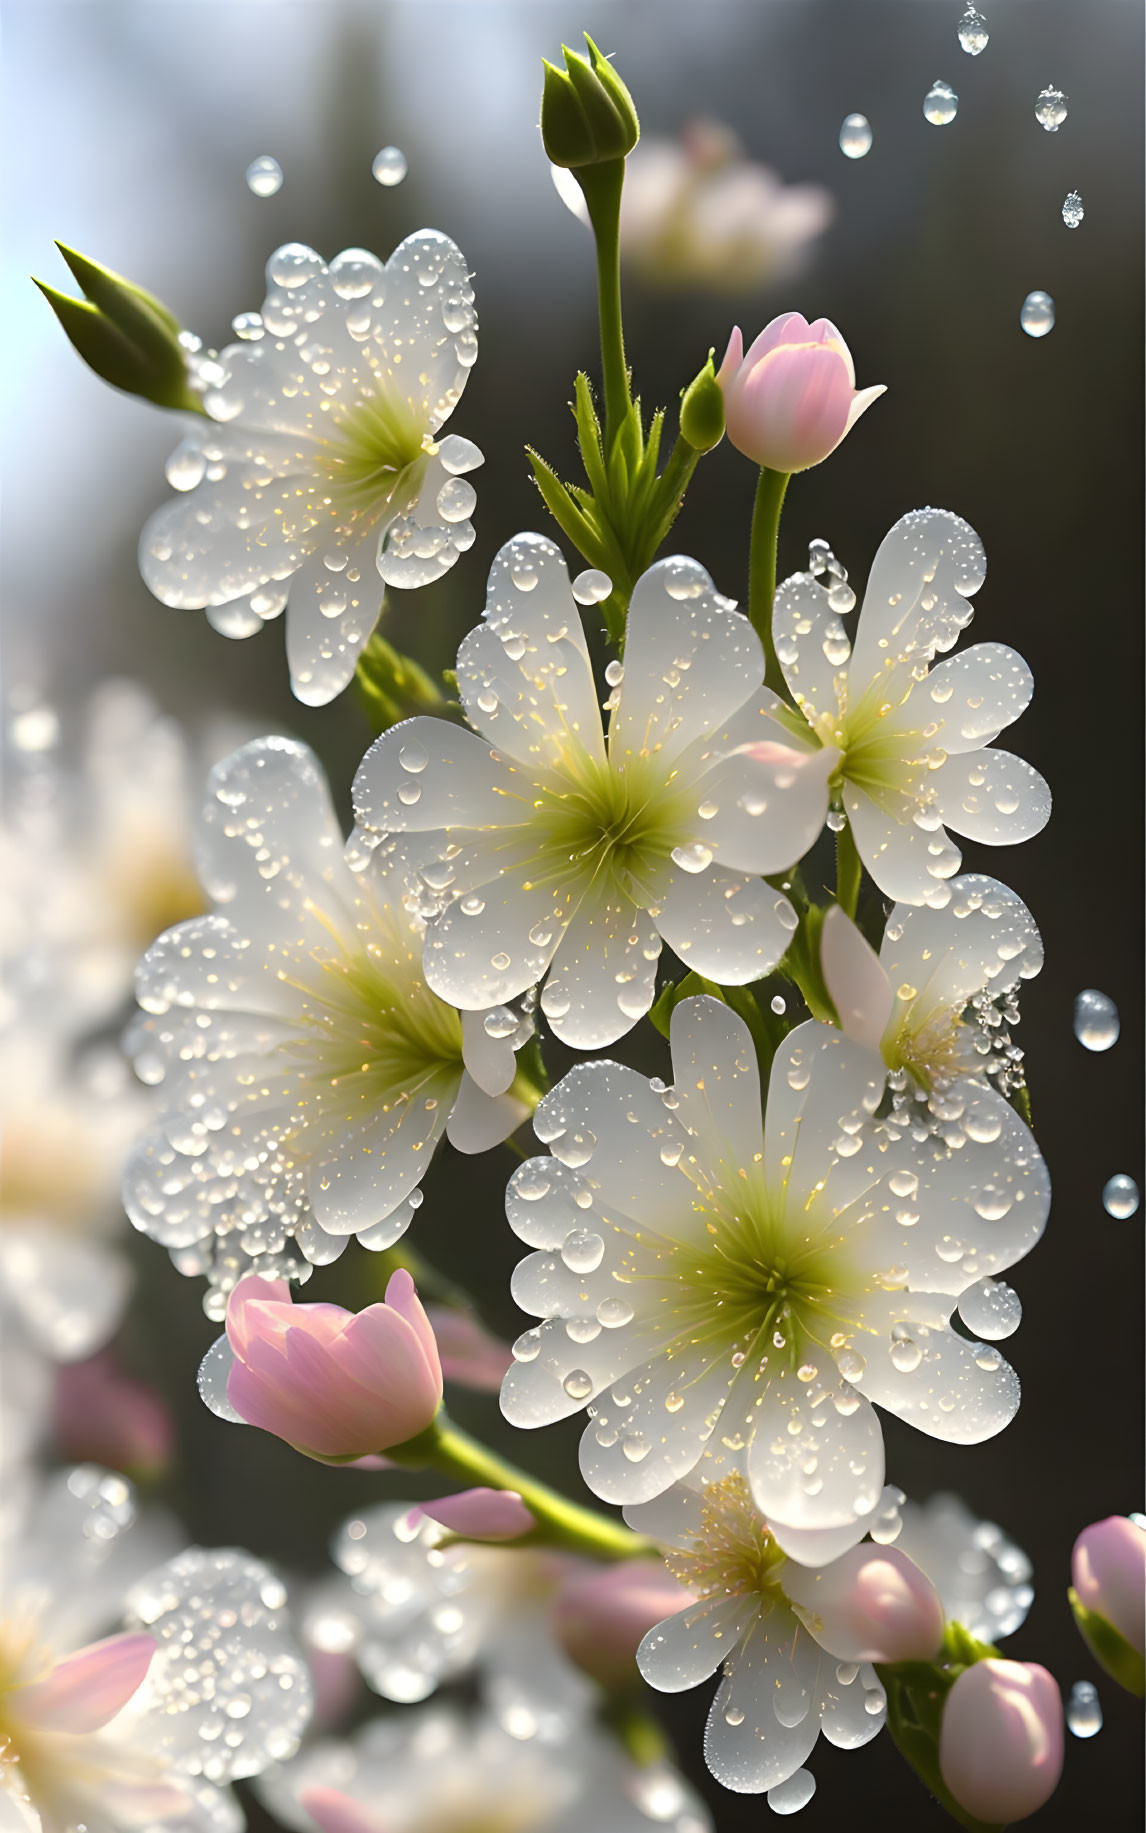 Fresh white blossoms with dewdrops in sunlight against blurred background